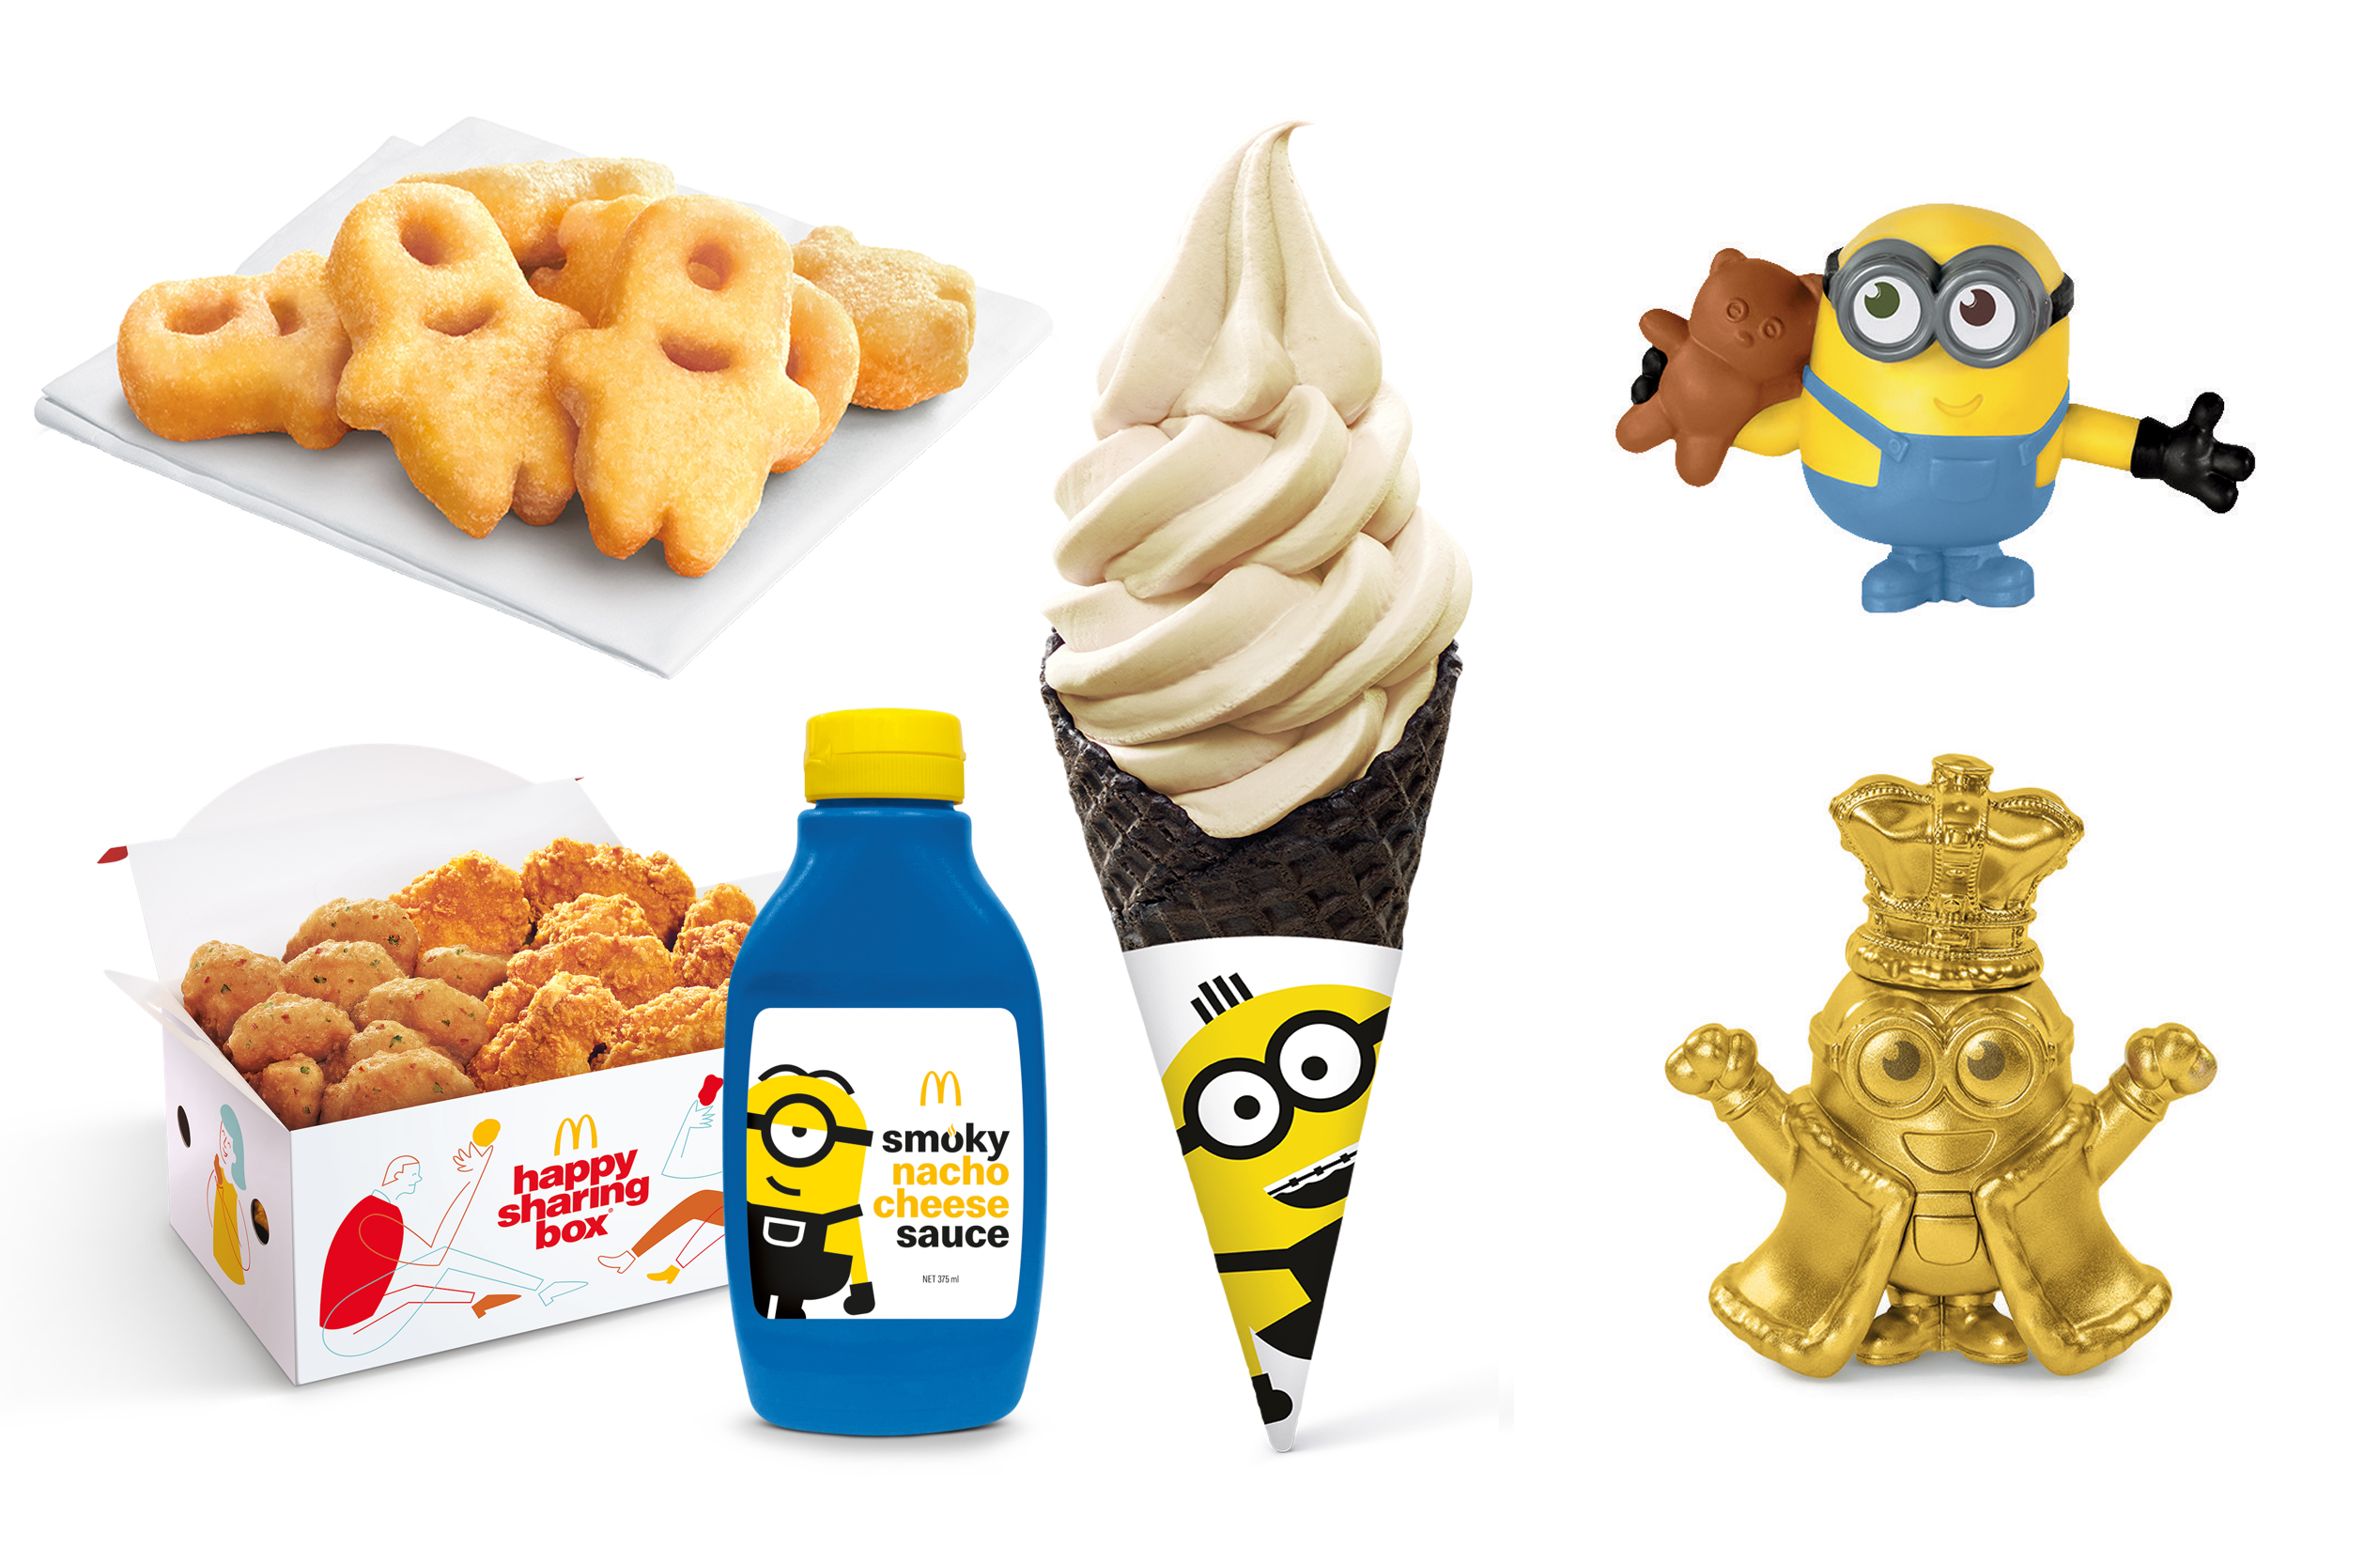 The Minions Are Back At McDonald’s With An Exclusive Golden Minion Twin